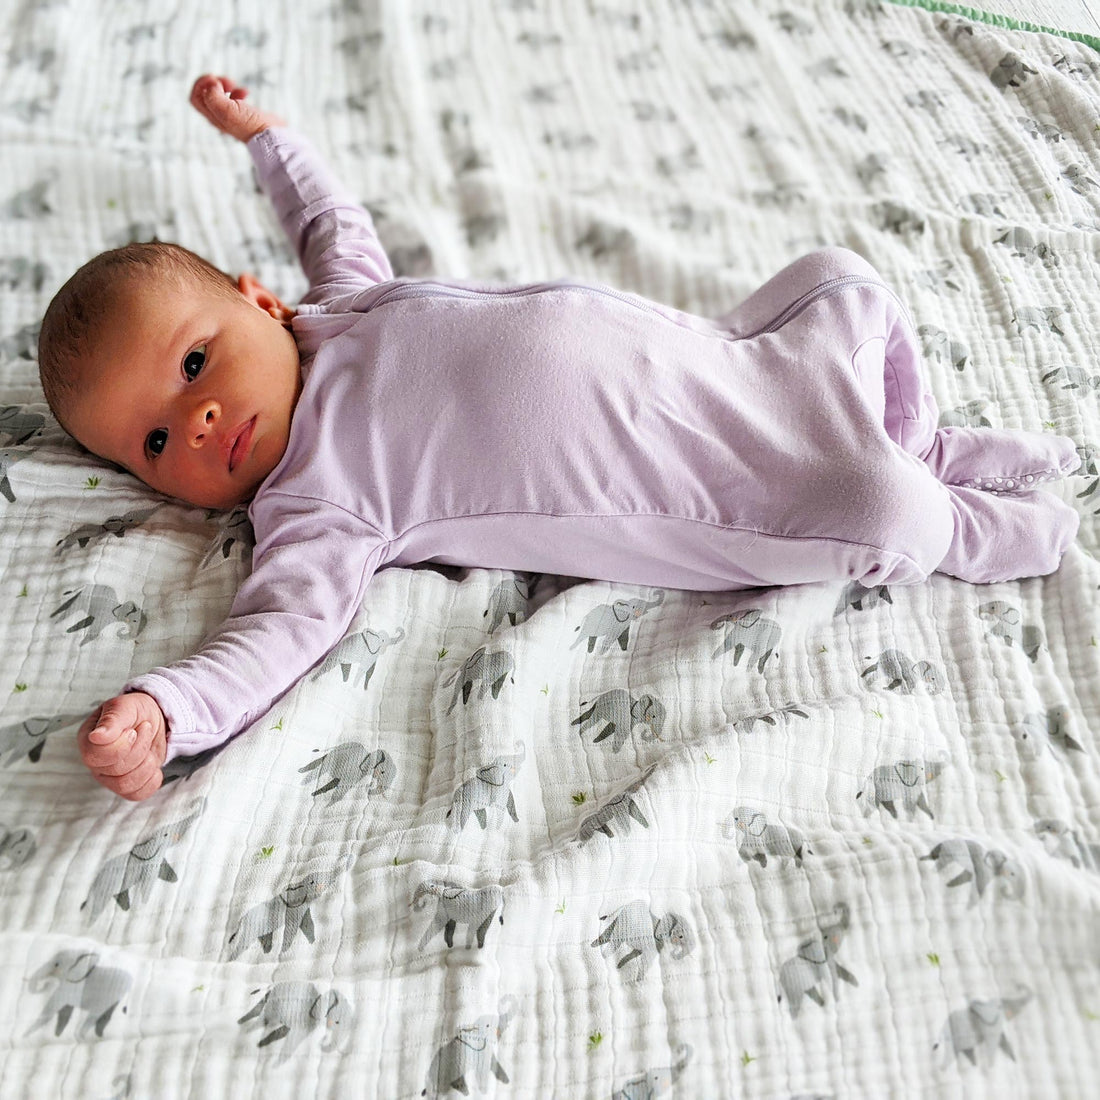 9 Reasons to Purchase Eco-Friendly Baby Clothing and Blankets